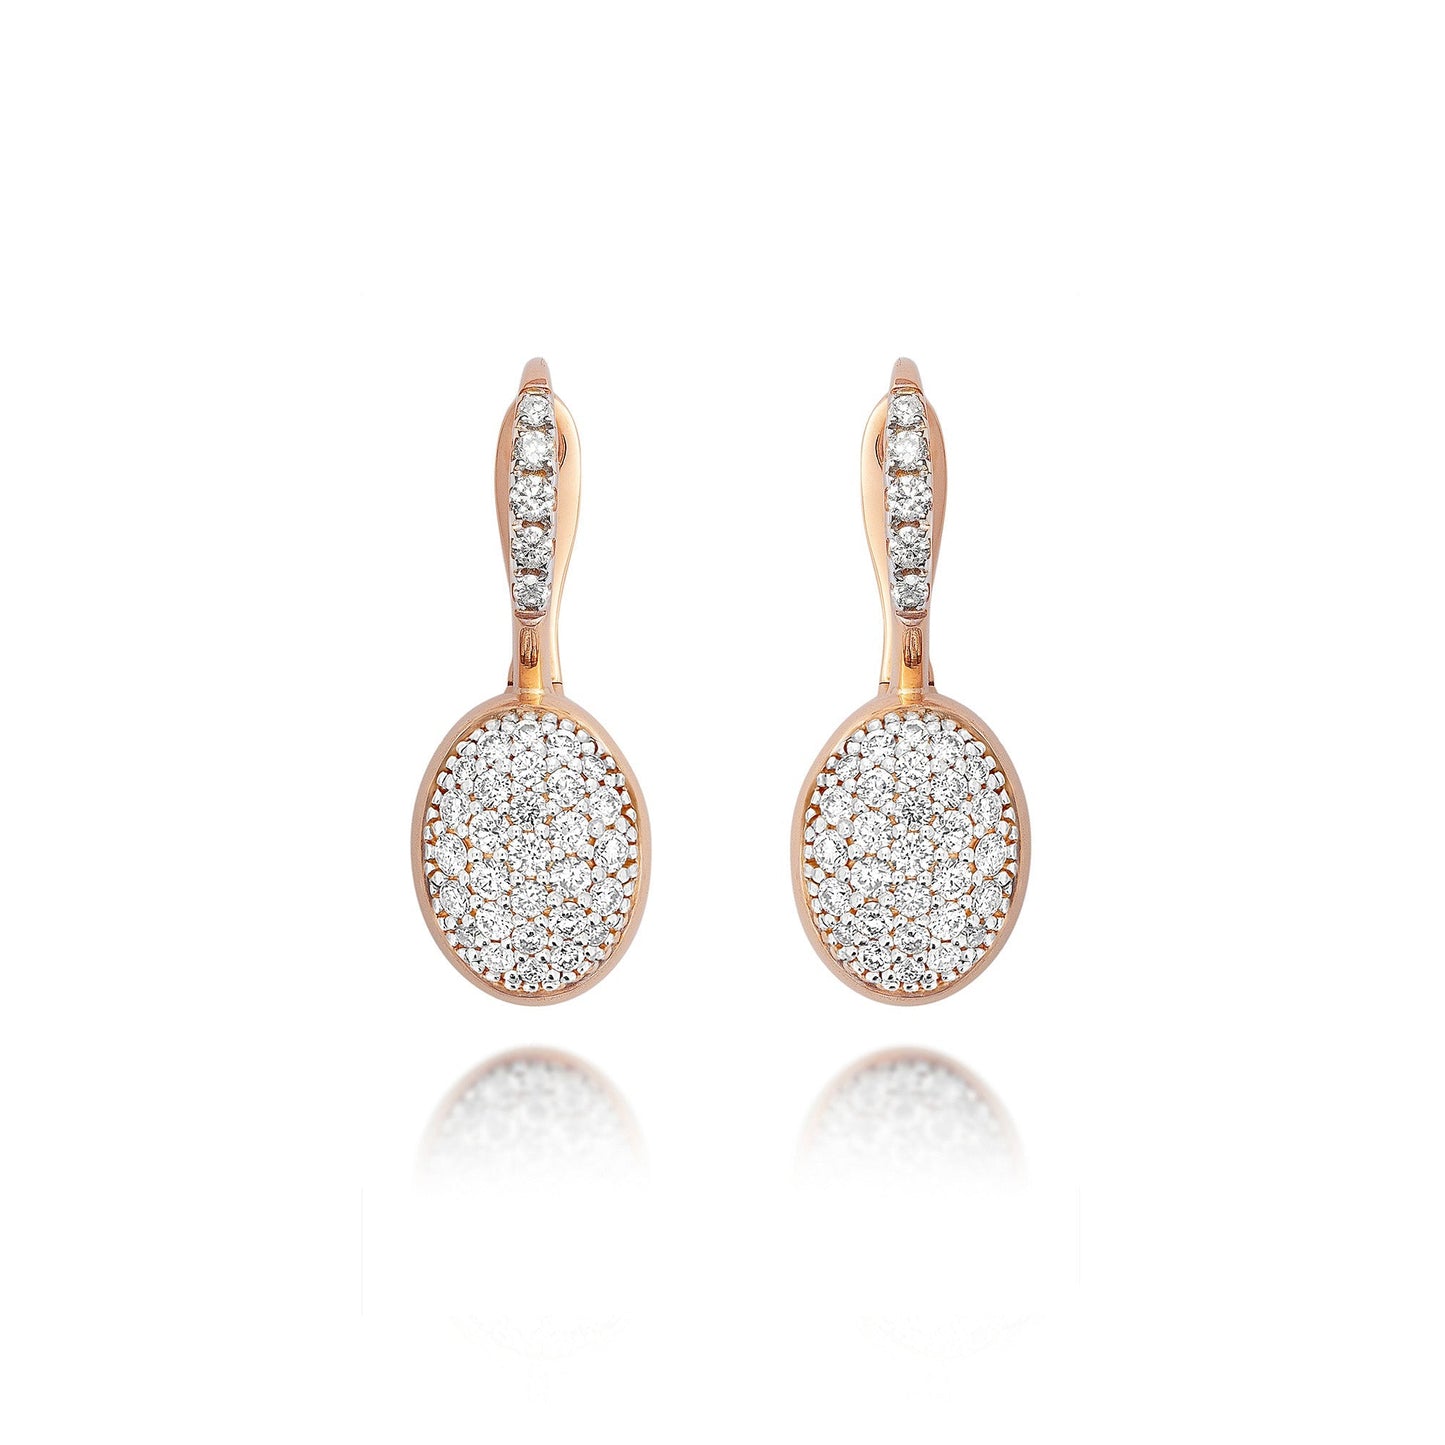 SUNSET "CILIEGINE" ROSE GOLD BOULES AND DIAMONDS (SMALL)